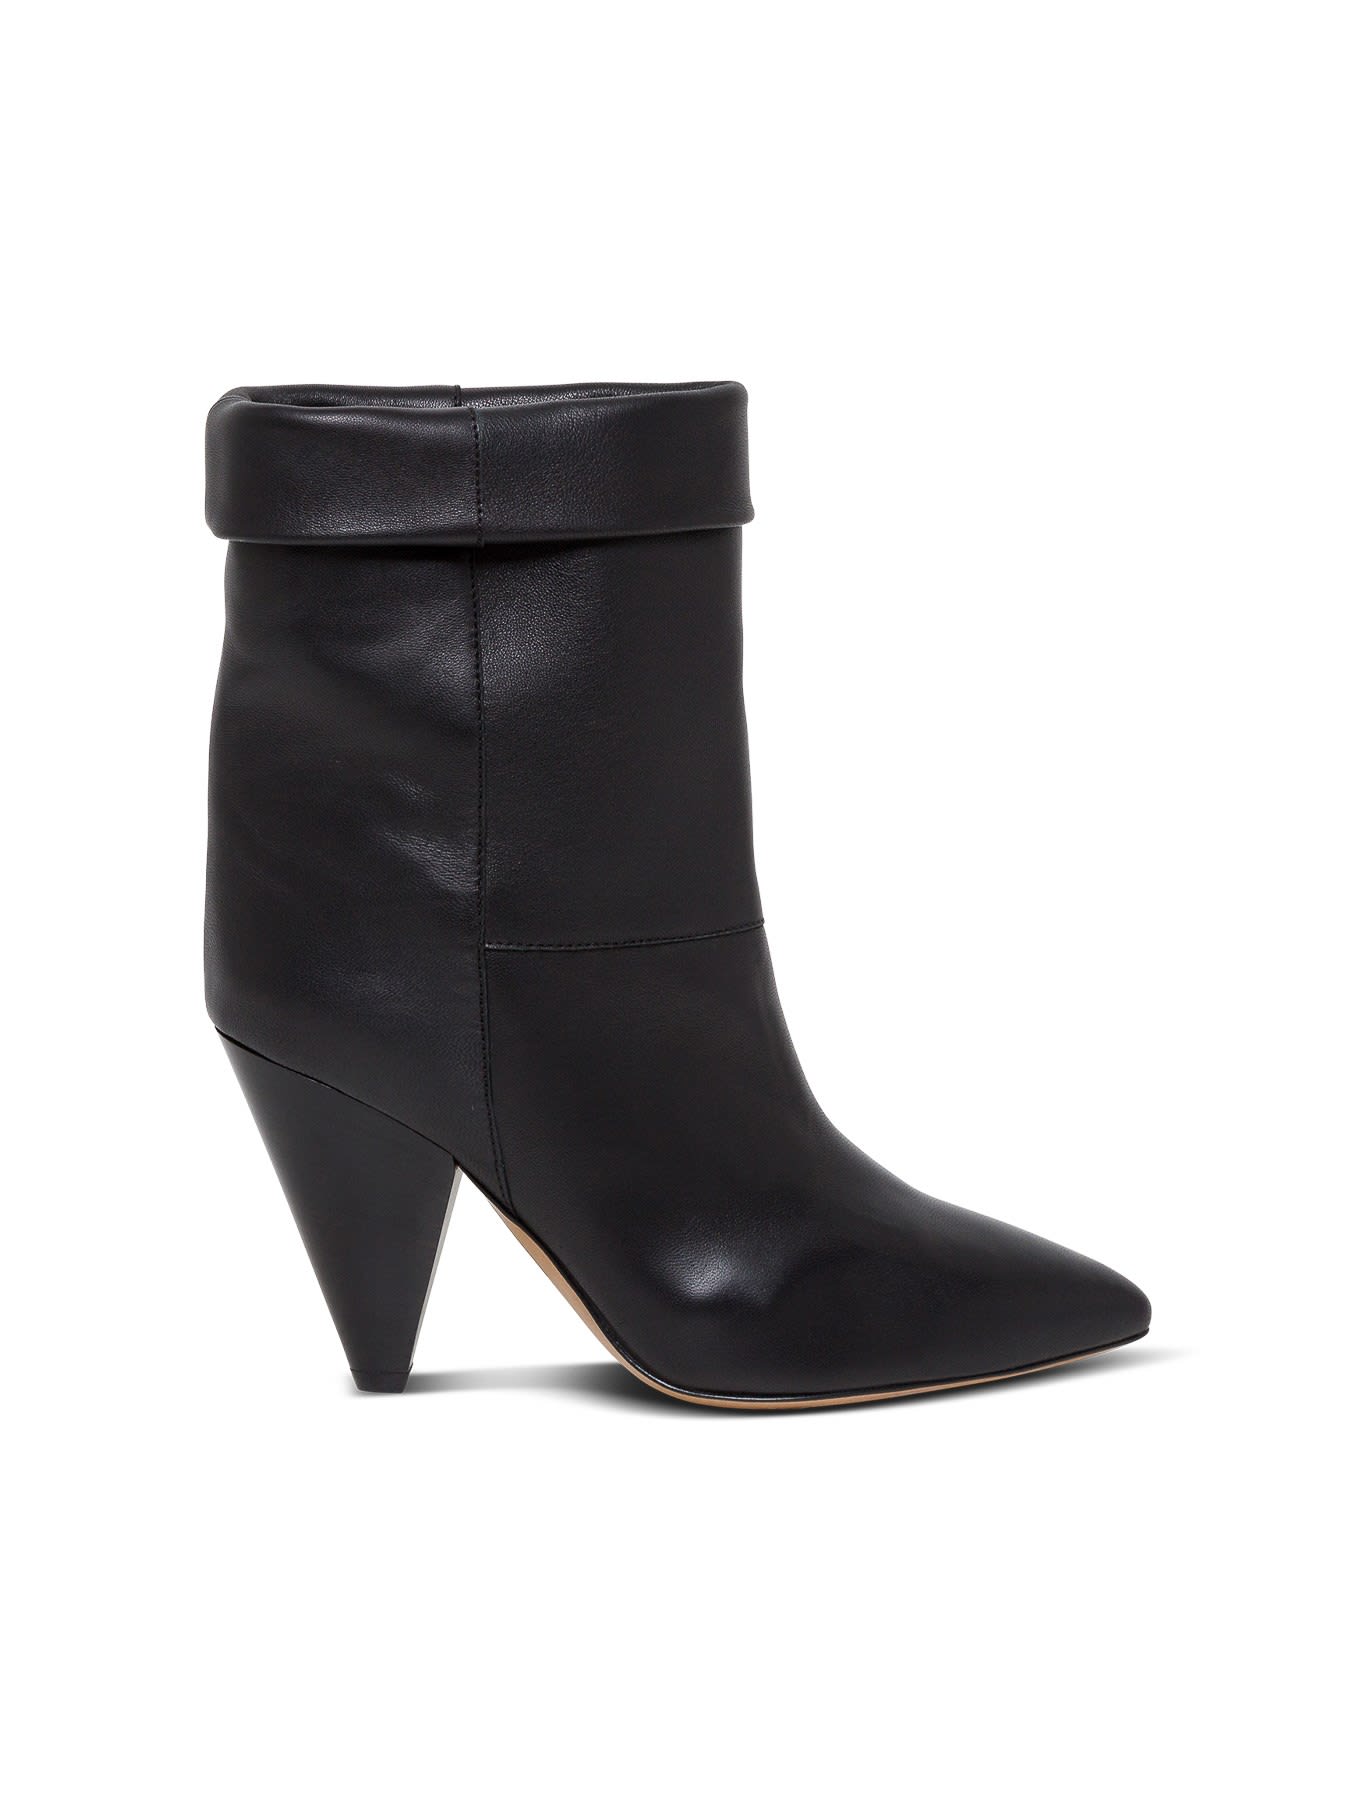 Buy Isabel Marant Luido Boots online, shop Isabel Marant shoes with free shipping